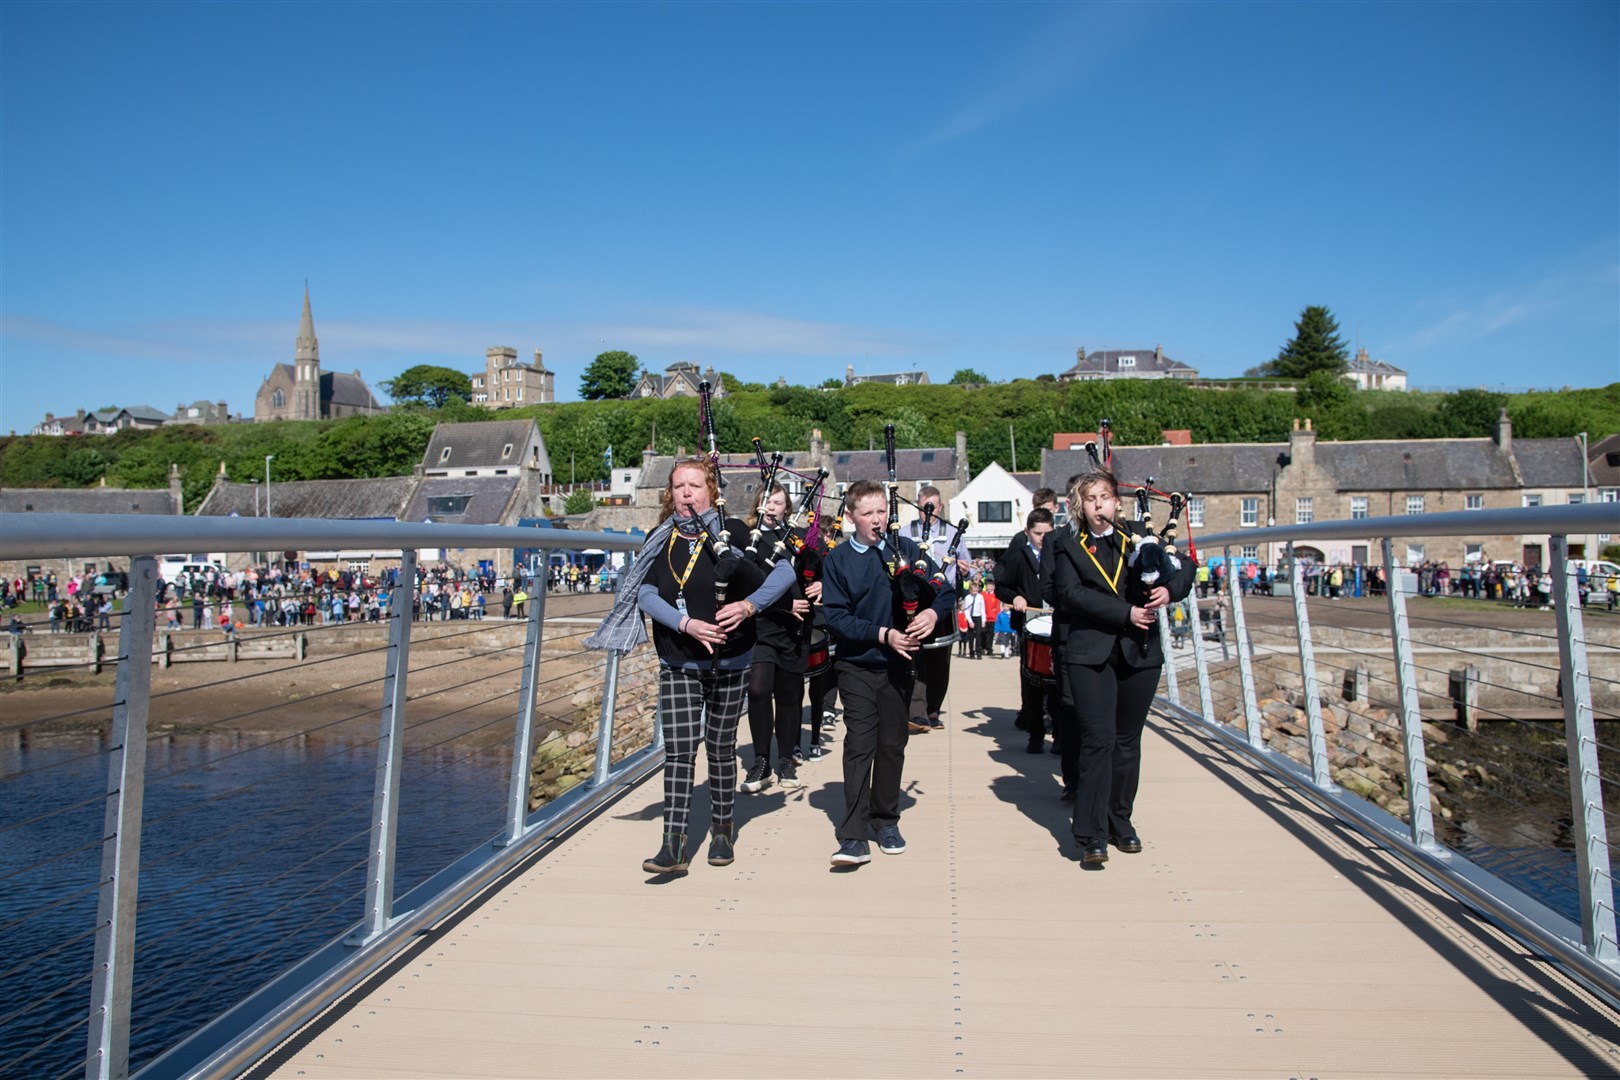 The Lossiemouth High School pipe band leads guests across the bridge. Picture: Daniel Forsyth